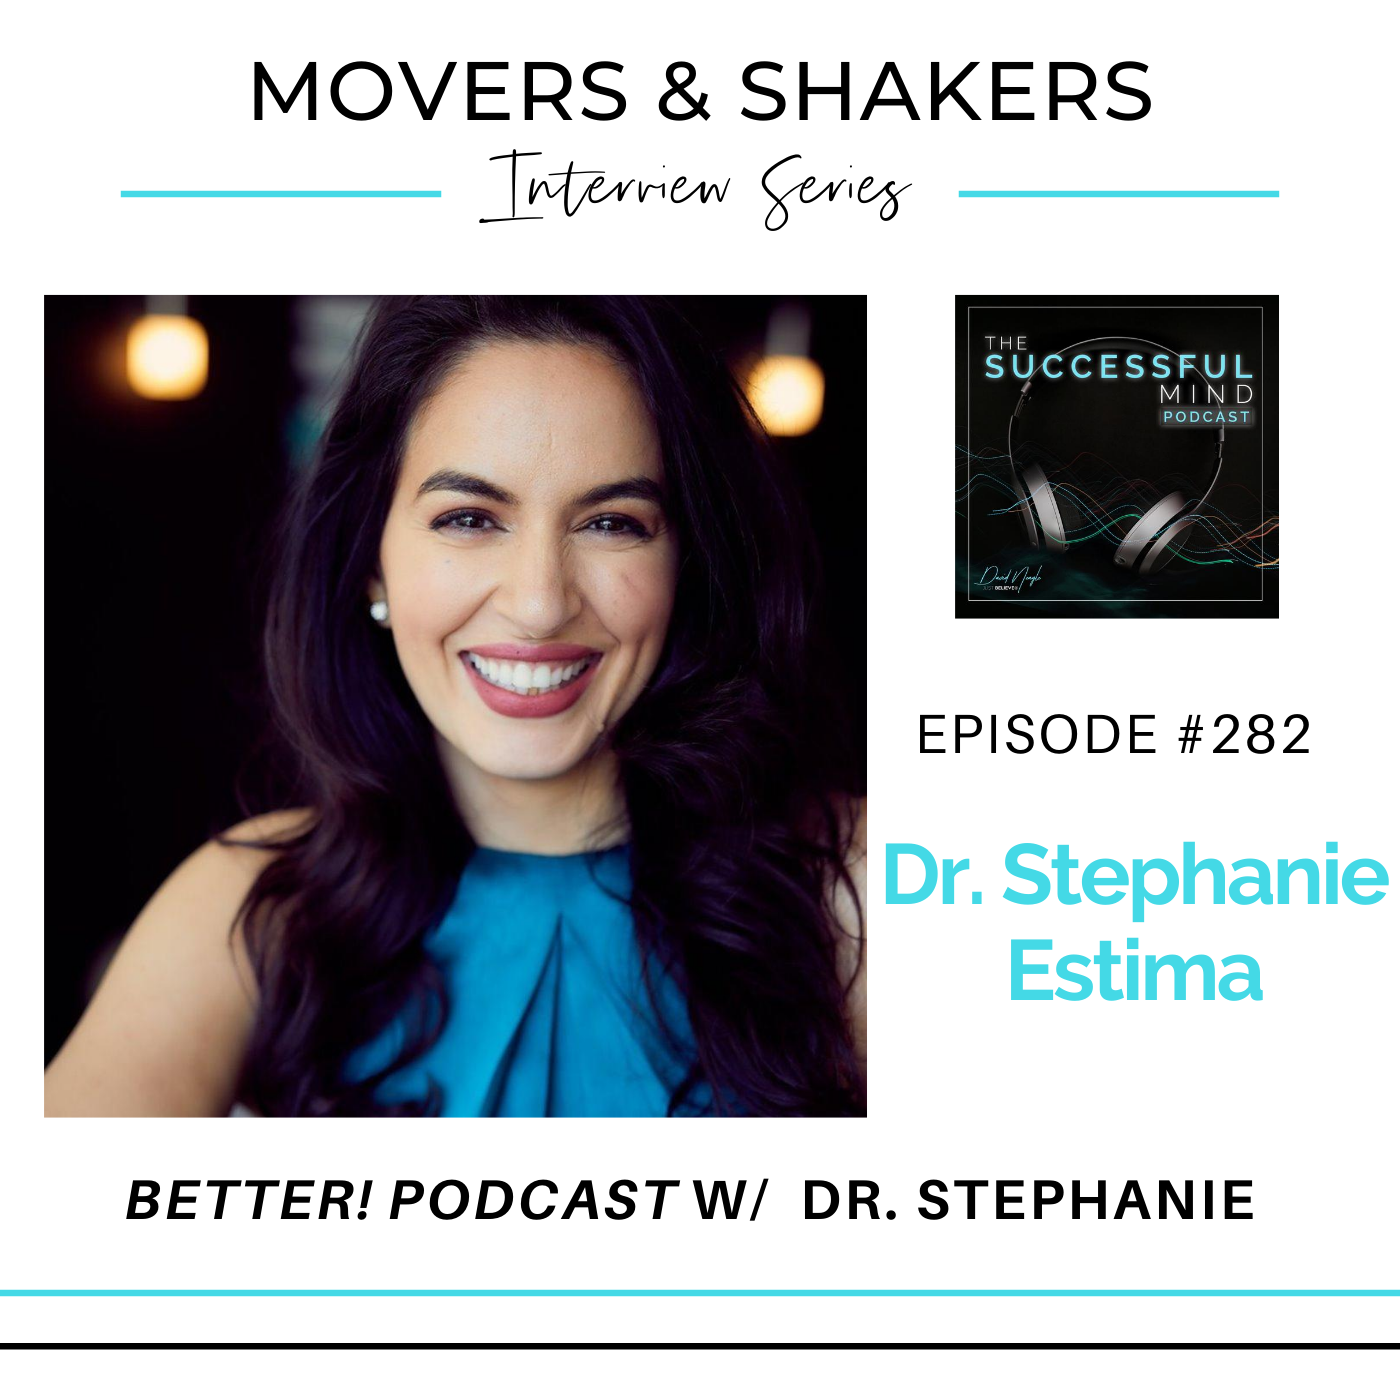 Episode-282-Movers-Shakers-Dr-Stephanie-Estima-and-Gender-Success-Differences